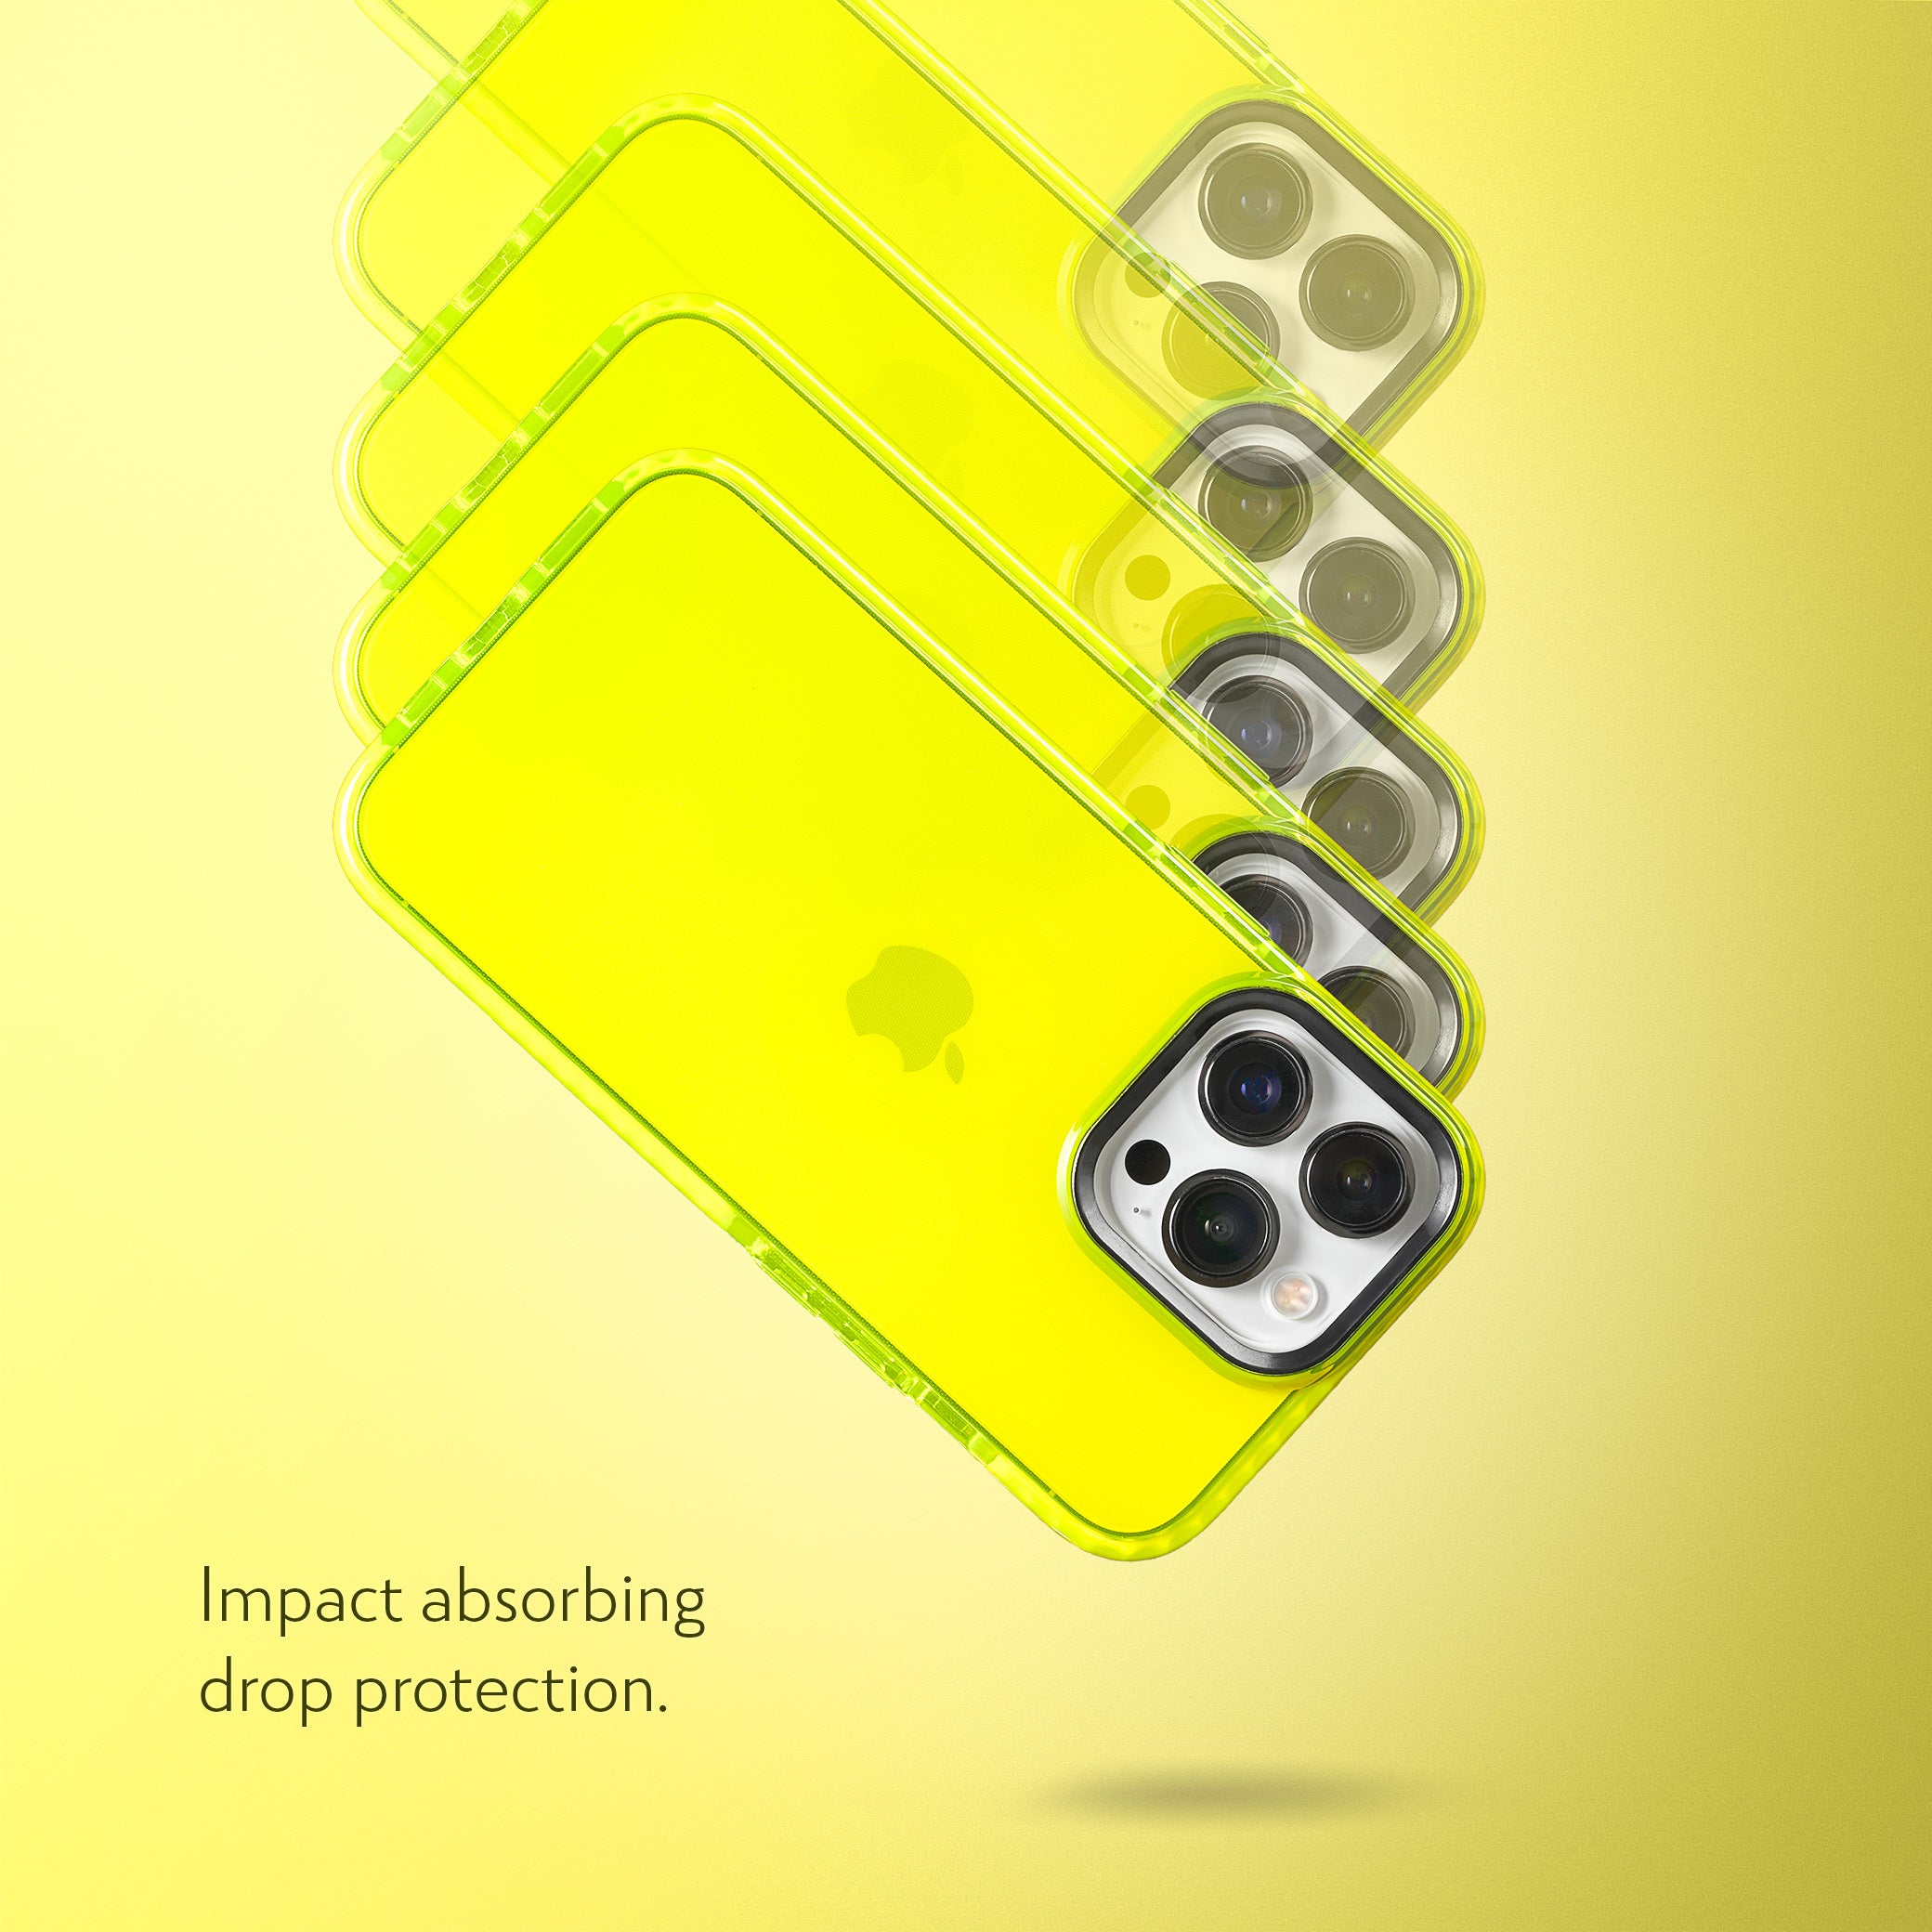 Barrier Case for iPhone 13 Pro - Hi-Energy Neon Yellow